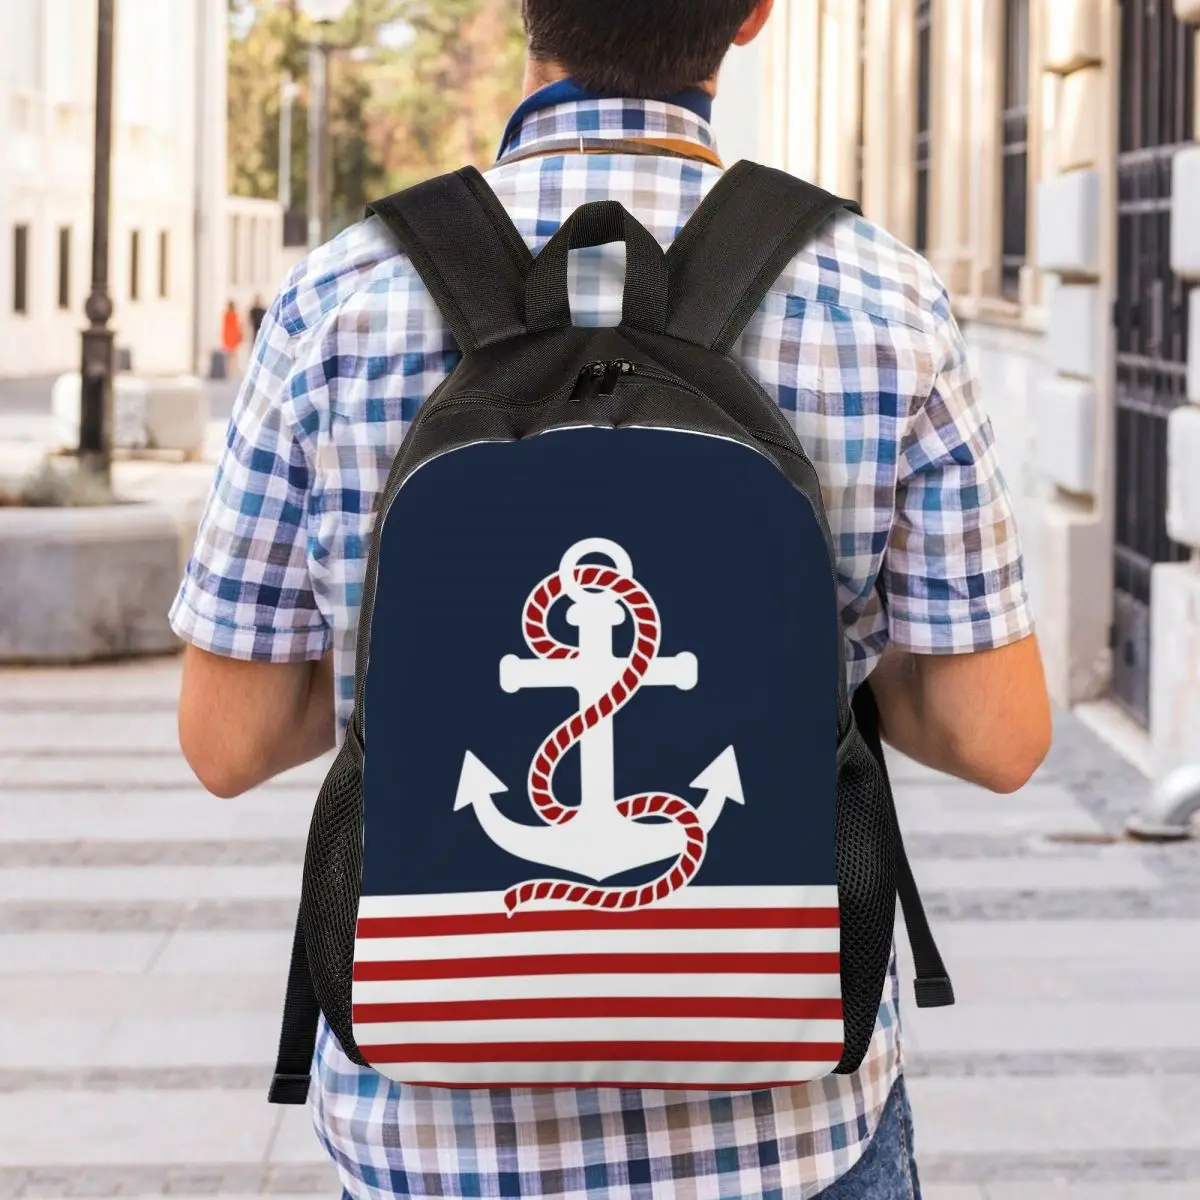 Nautical Stripes And Red Anchor Backpack for Boys Girls Sailing Sailor College School Travel Bags Bookbag Fits 15 Inch Laptop images - 6